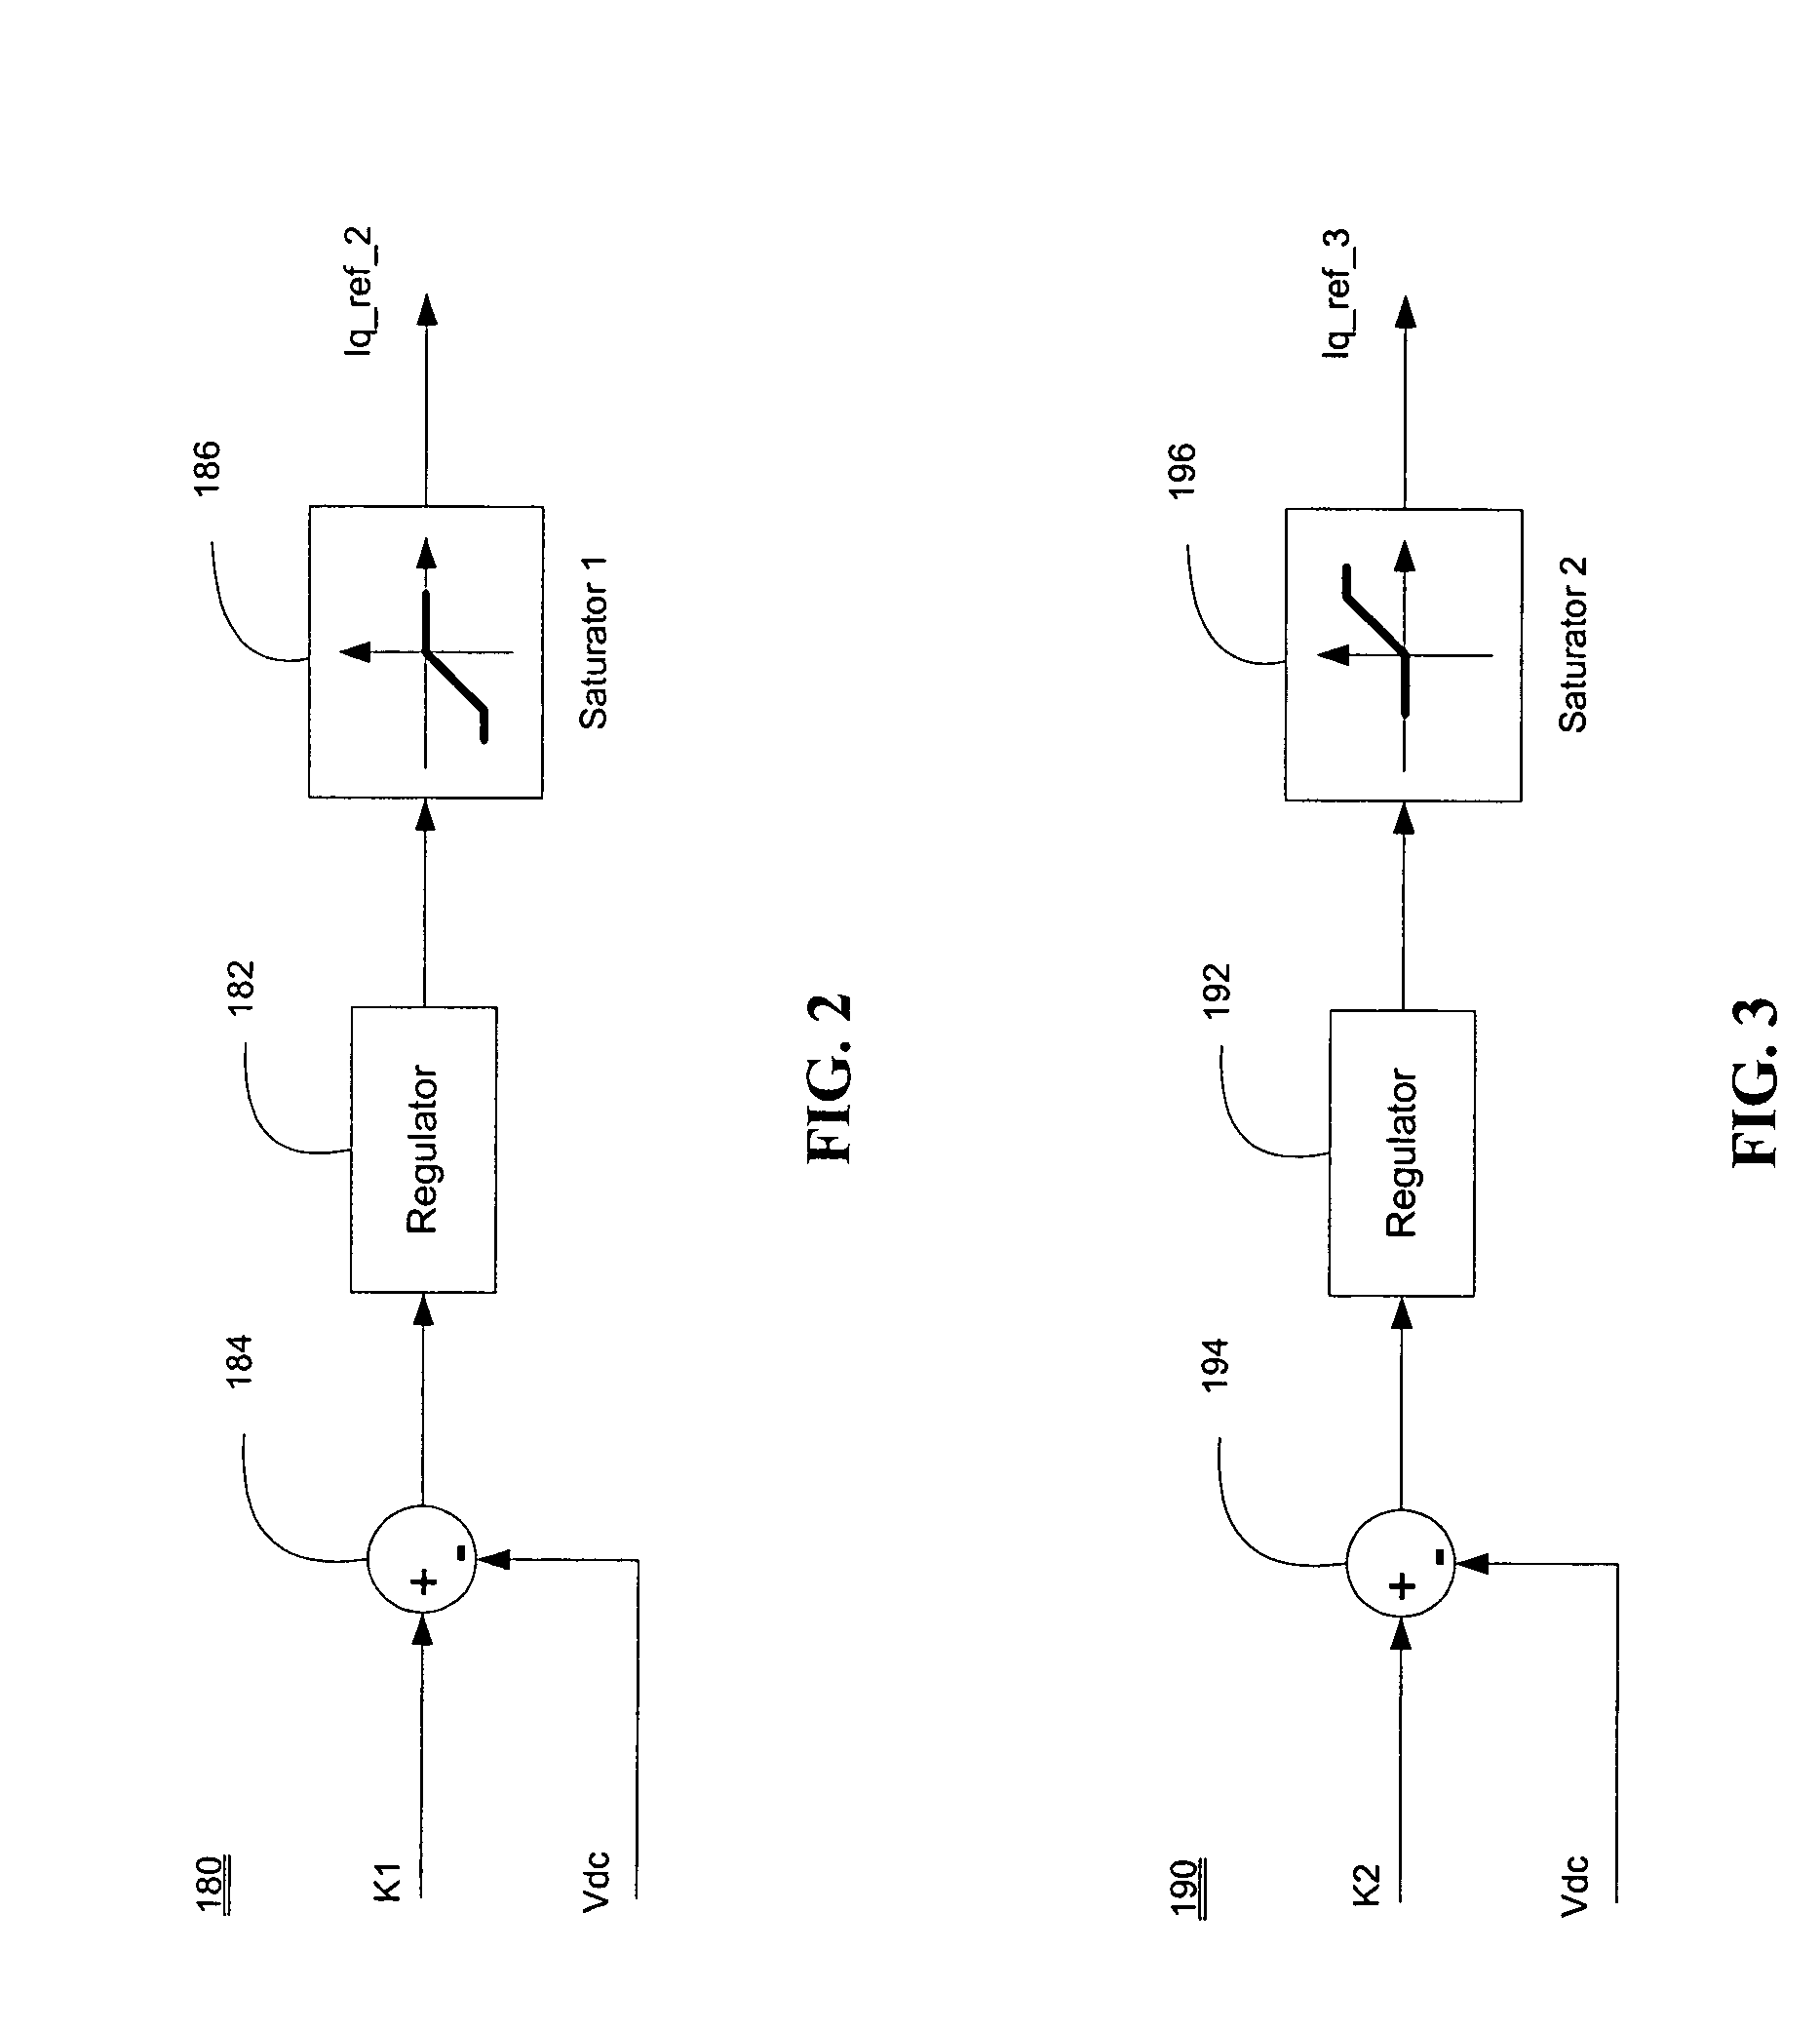 Advanced current control method and apparatus for a motor drive system